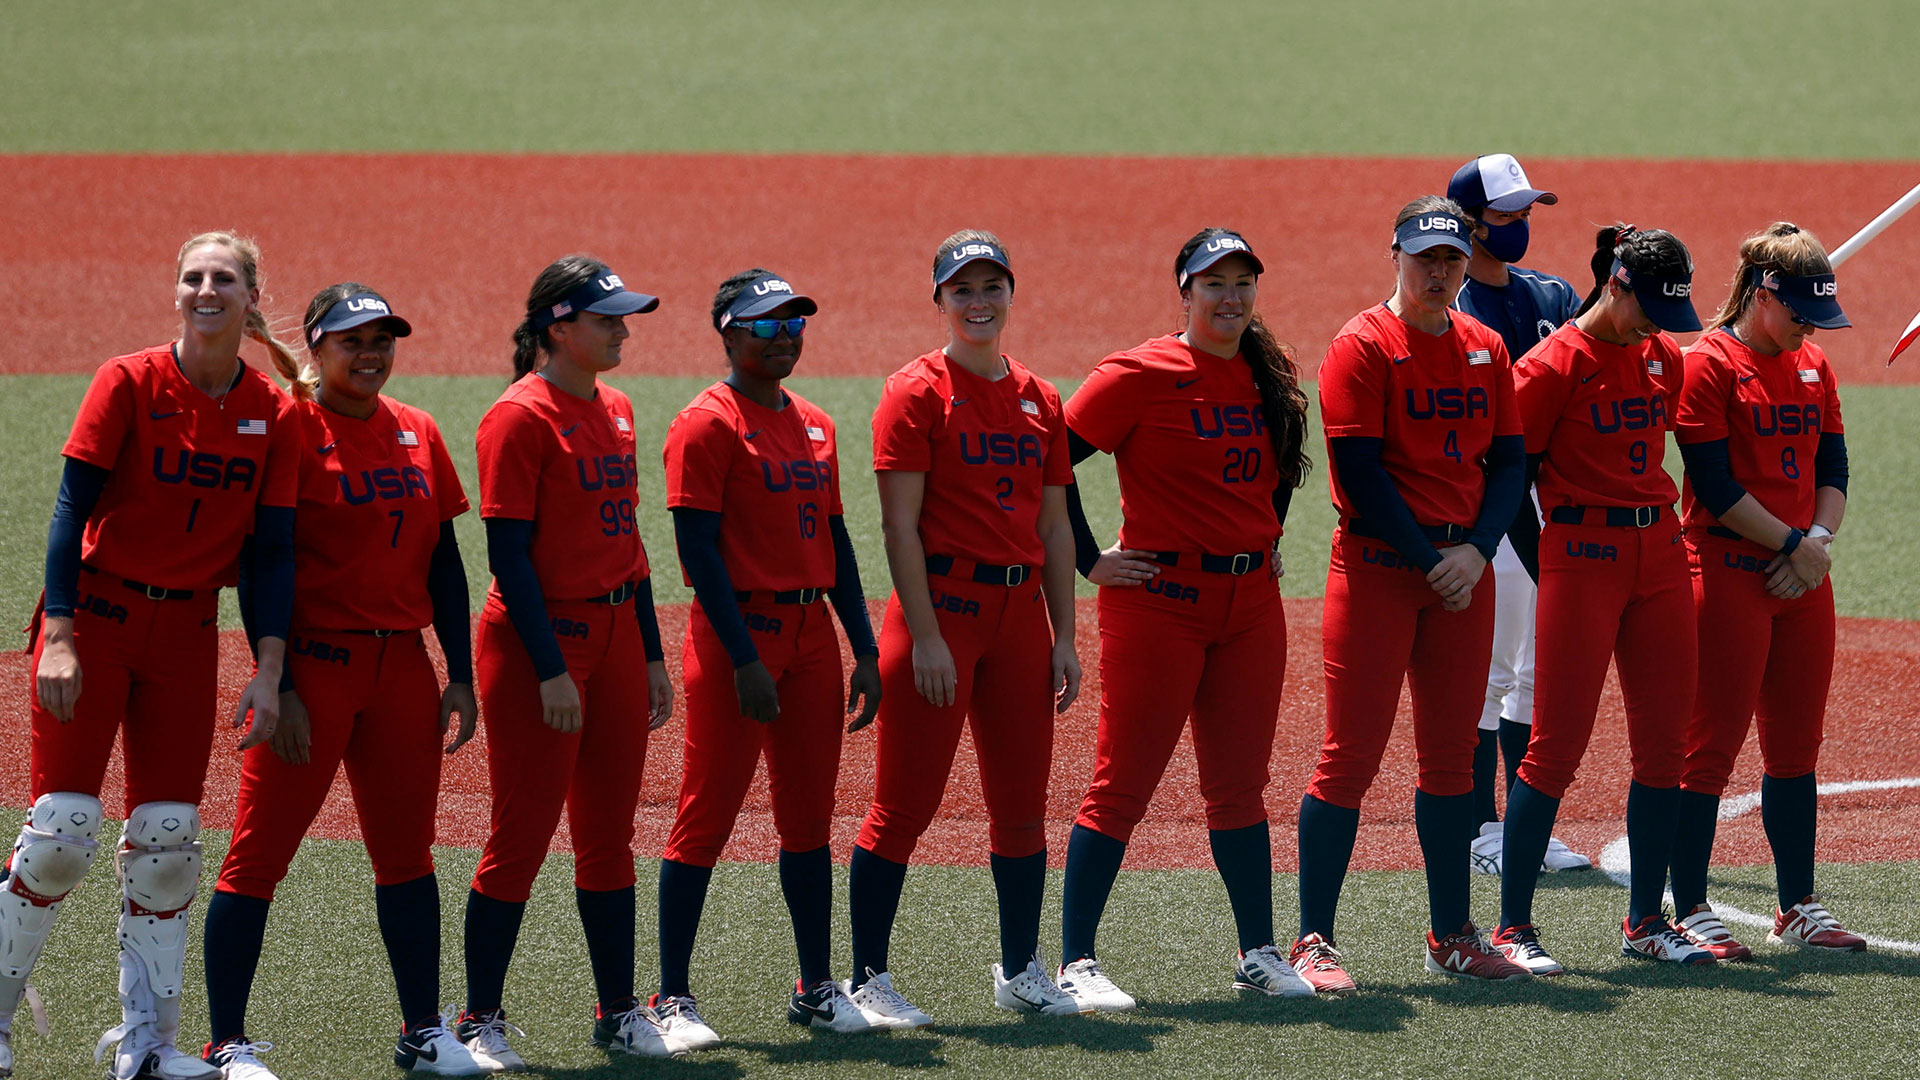 Team Usa Softball Defeats Italy In Their Opening Game Nbc 5 Dallas Fort Worth